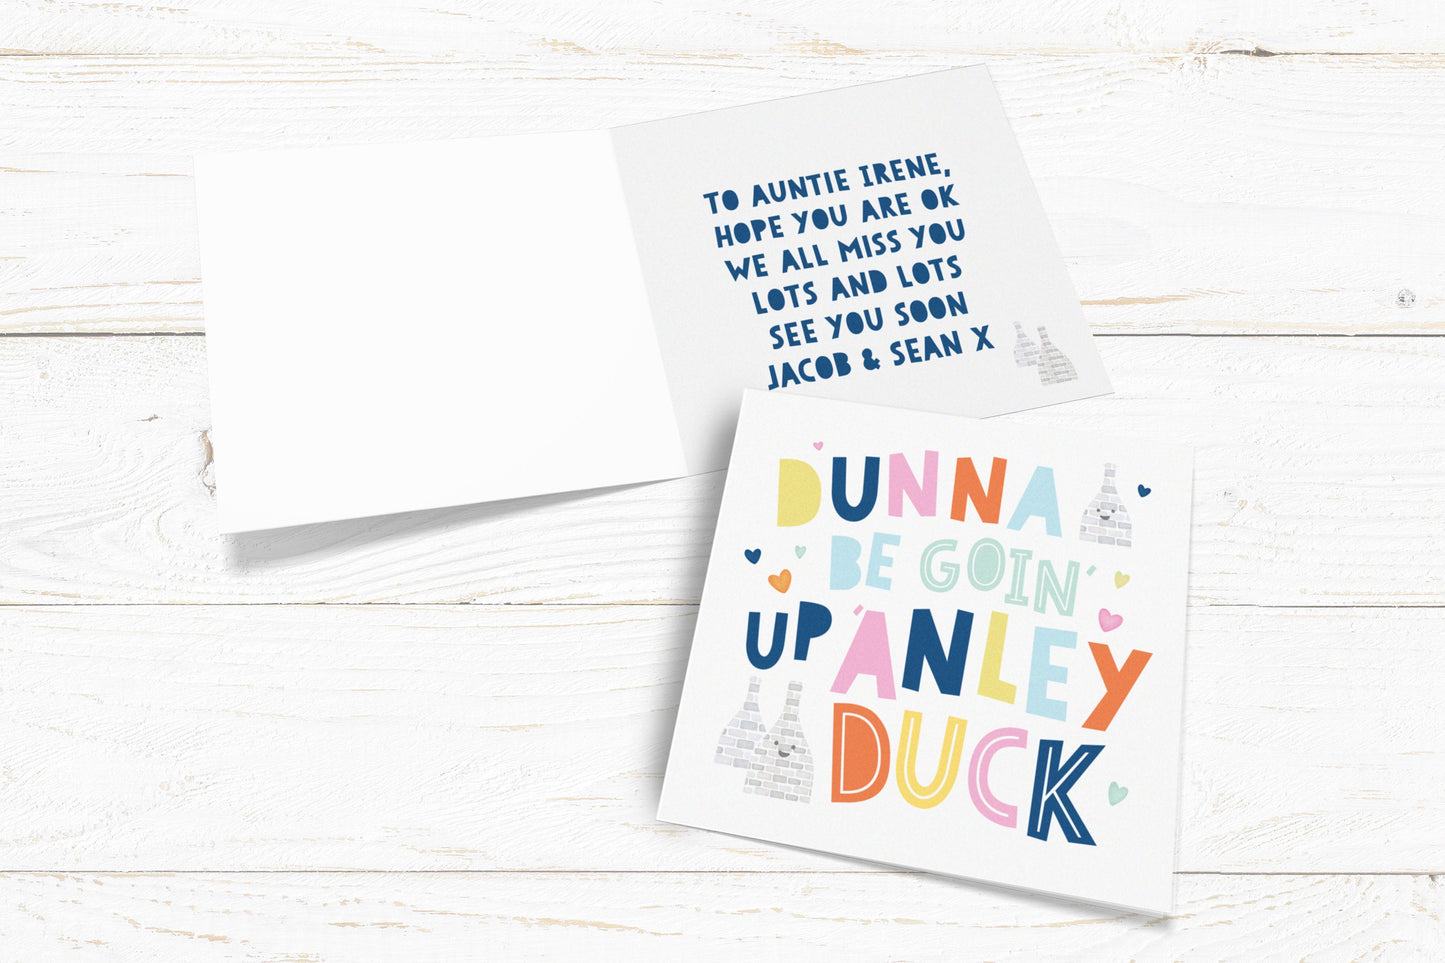 Dunna Be Goin' Up 'Anley Duck Card. Lockdown Cards. Stoke on Trent Cards. Send Direct Option.